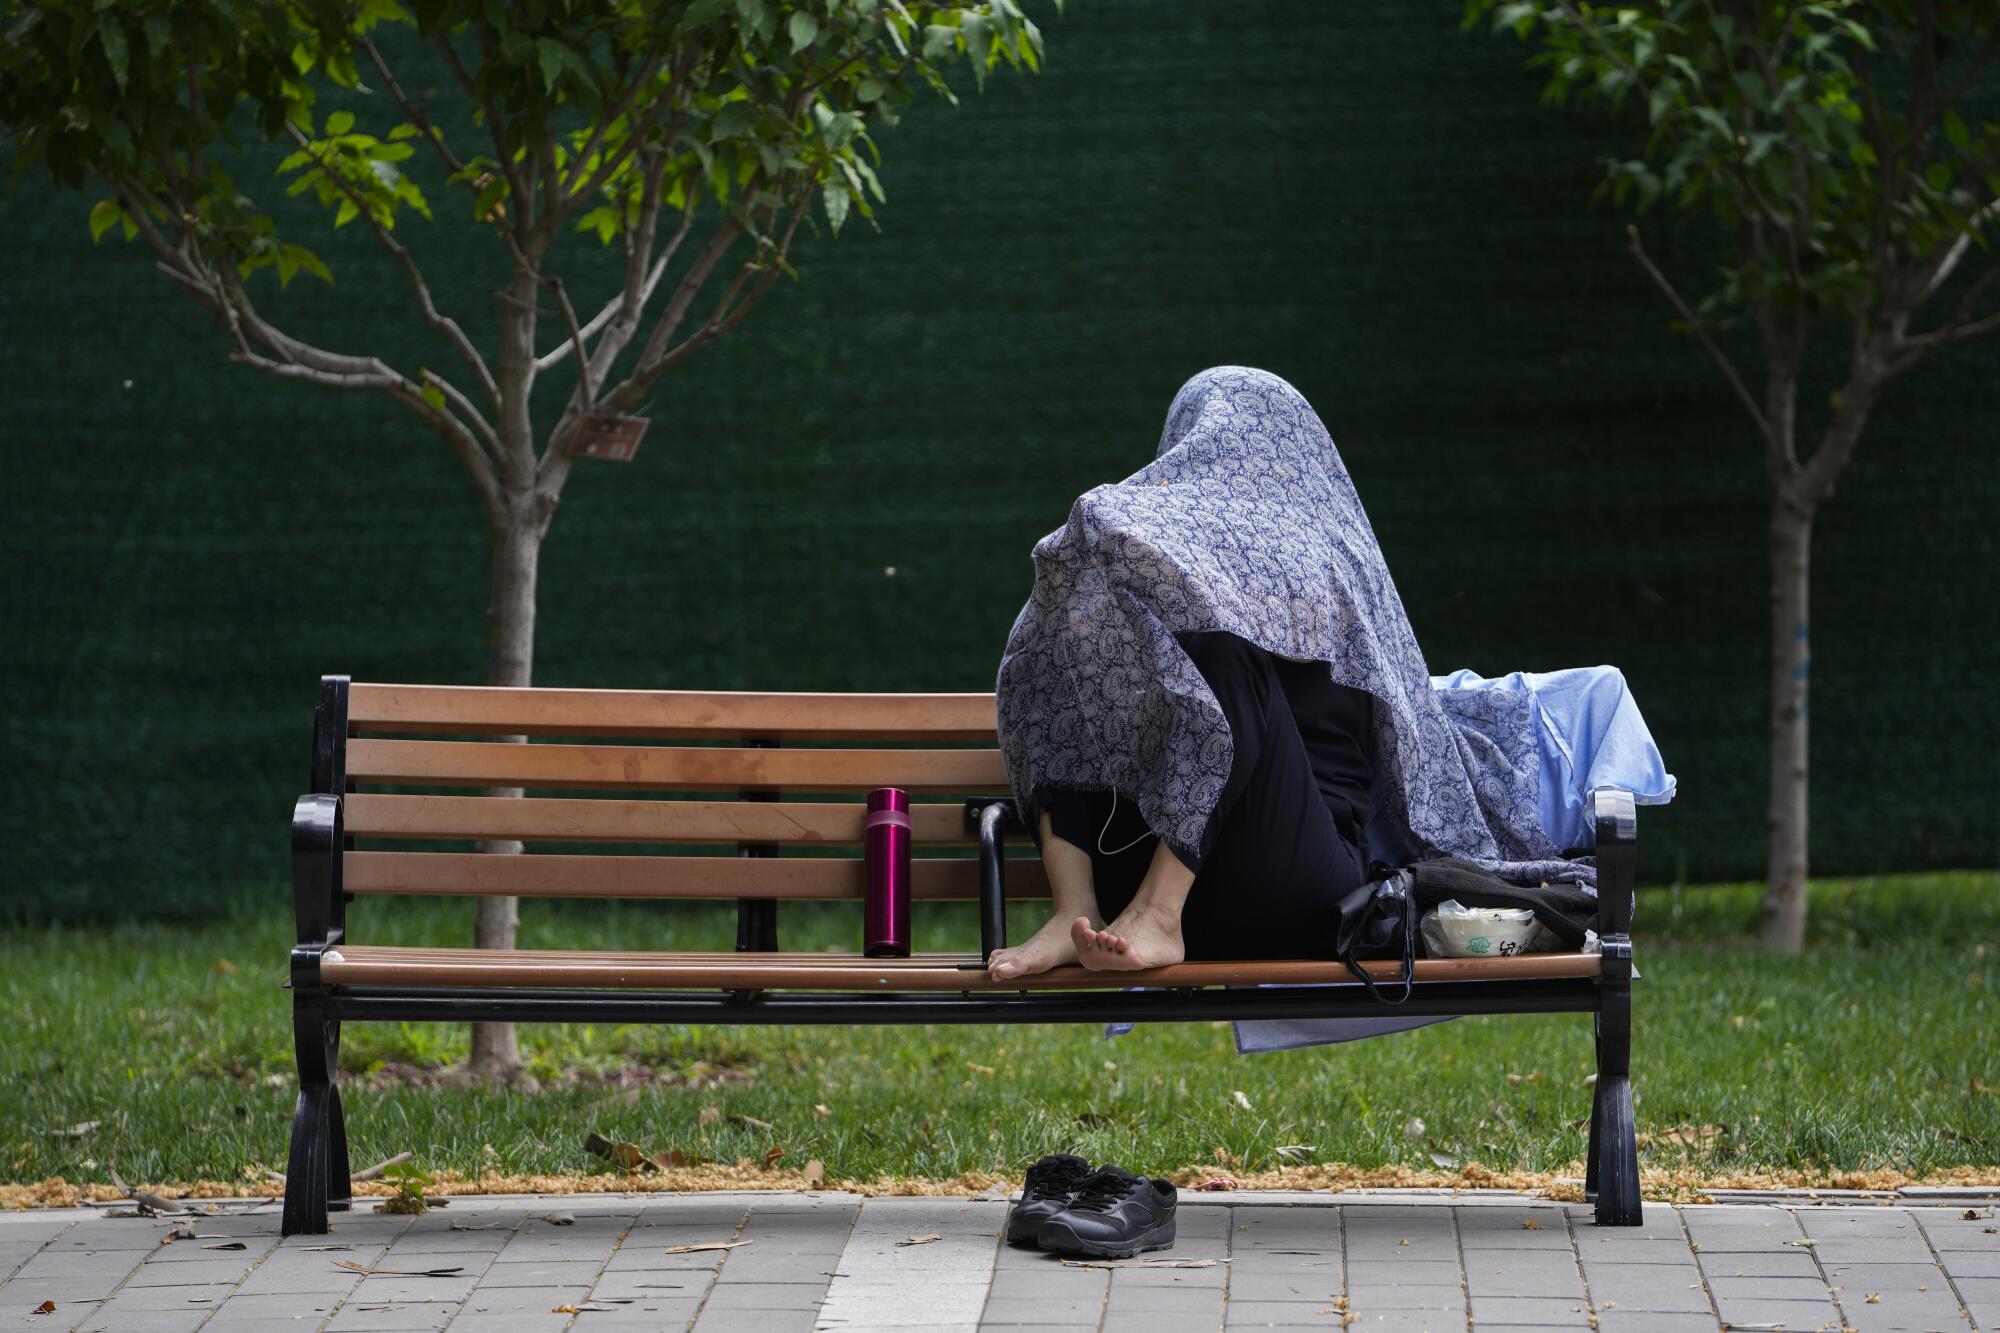 A barefoot woman, using a scarf to shield from the sun, sits on a bench.